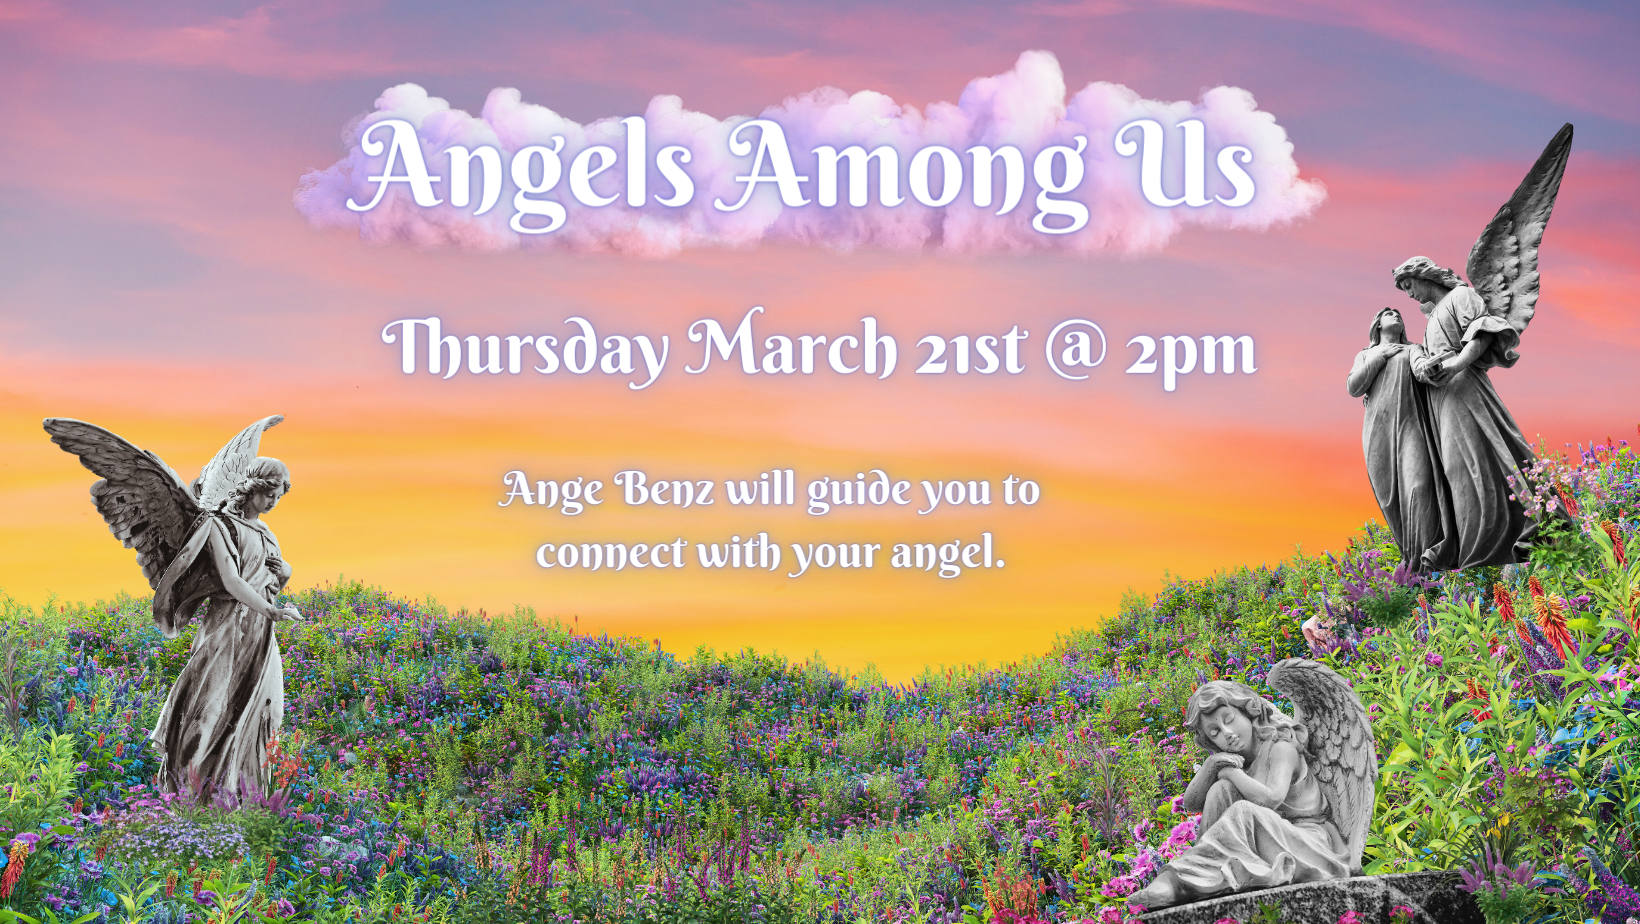 Angels Among Us, Thursday, March 21, 2:00 pm